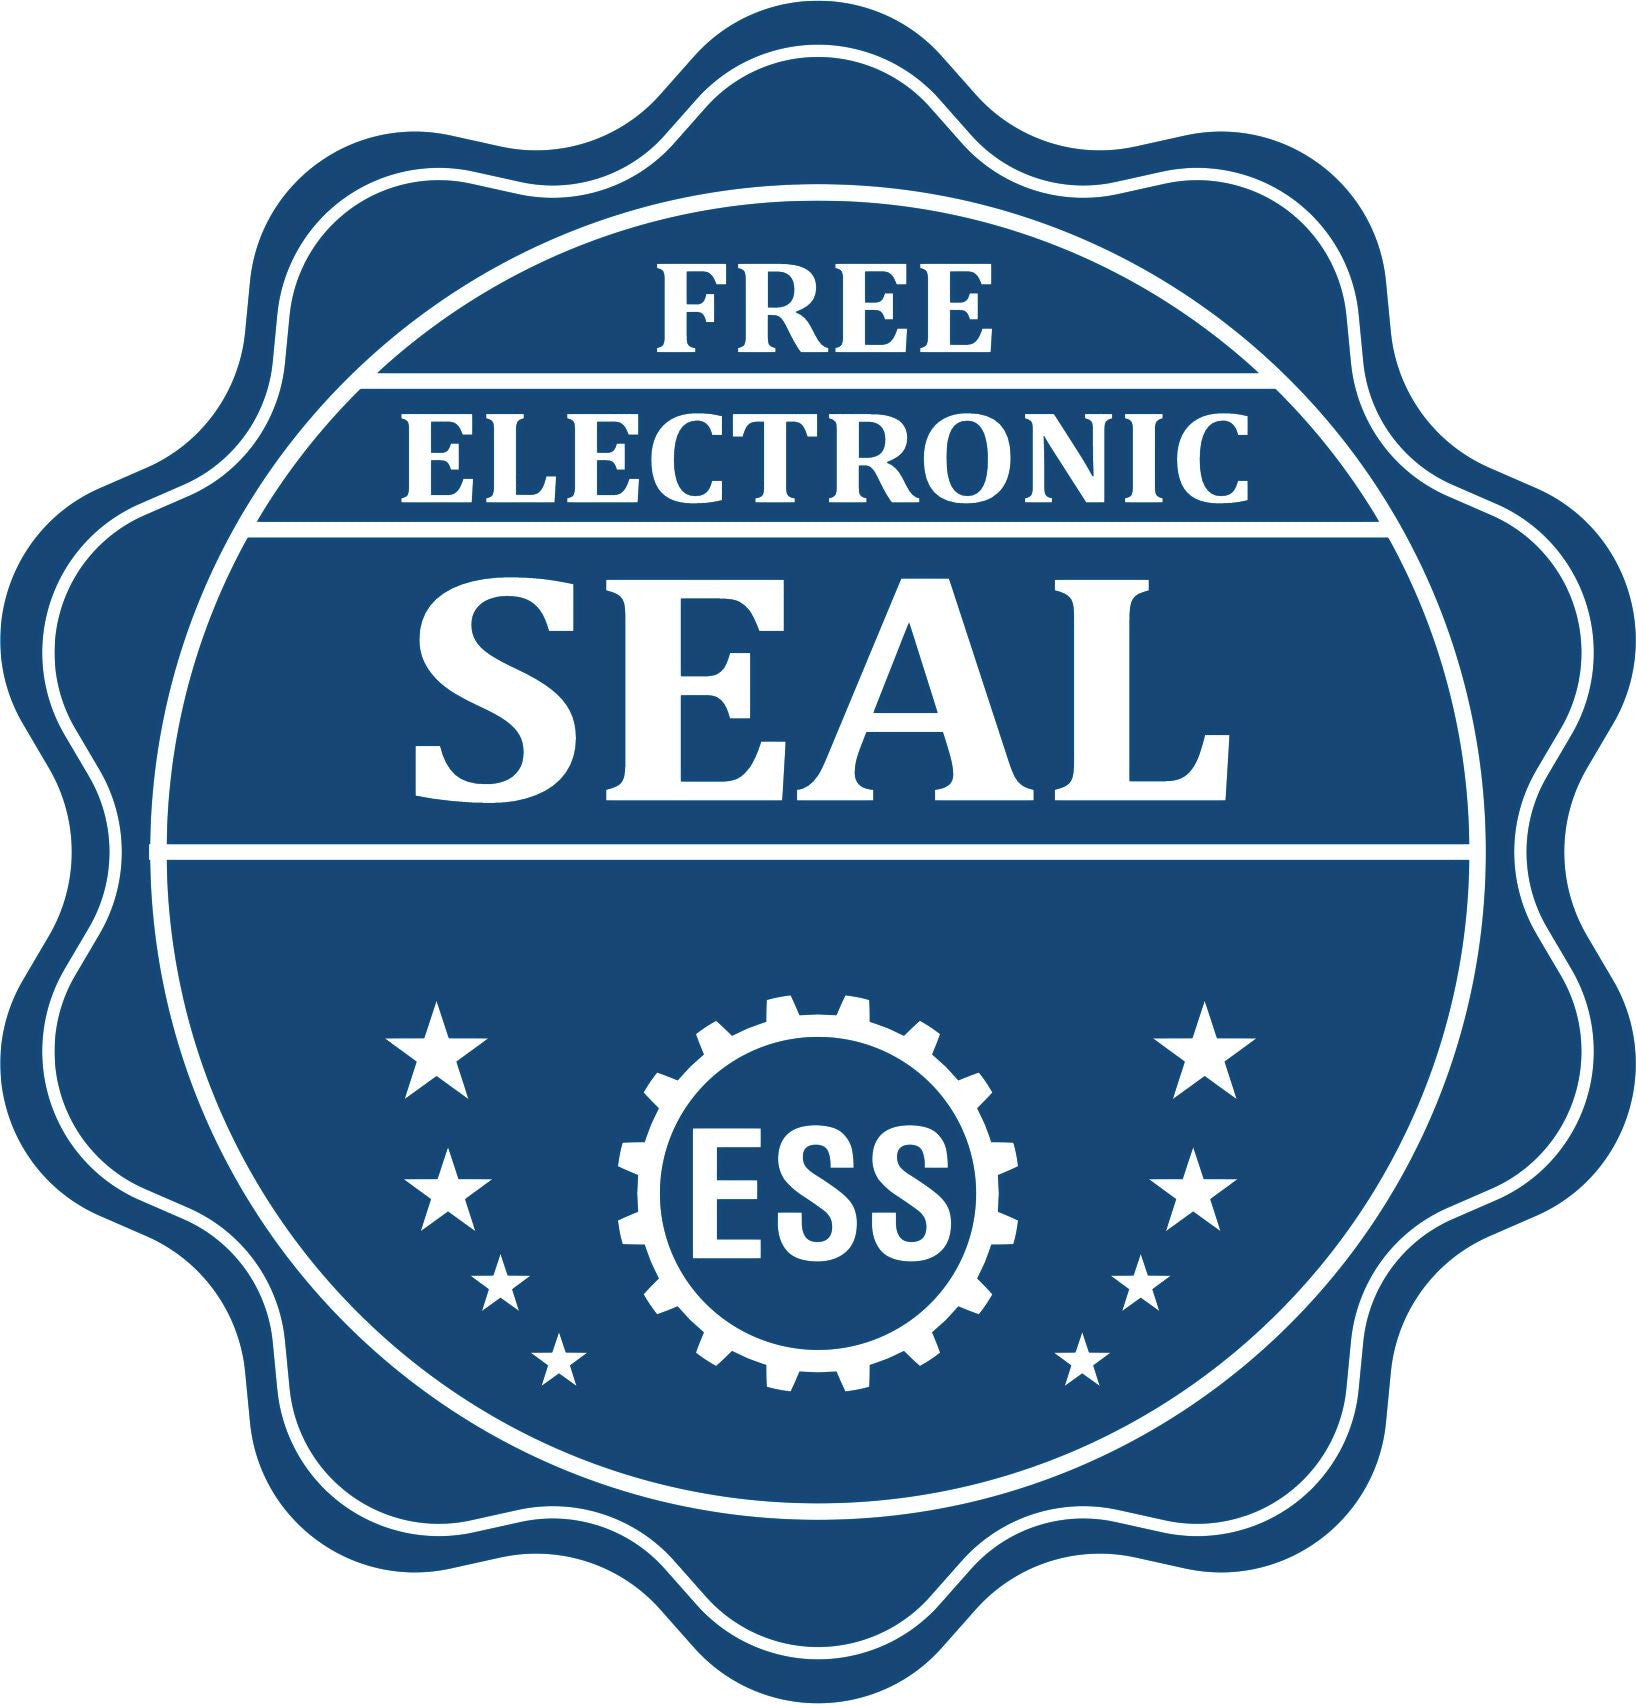 A badge showing a free electronic seal for the Slim Pre-Inked West Virginia Landscape Architect Seal Stamp with stars and the ESS gear on the emblem.